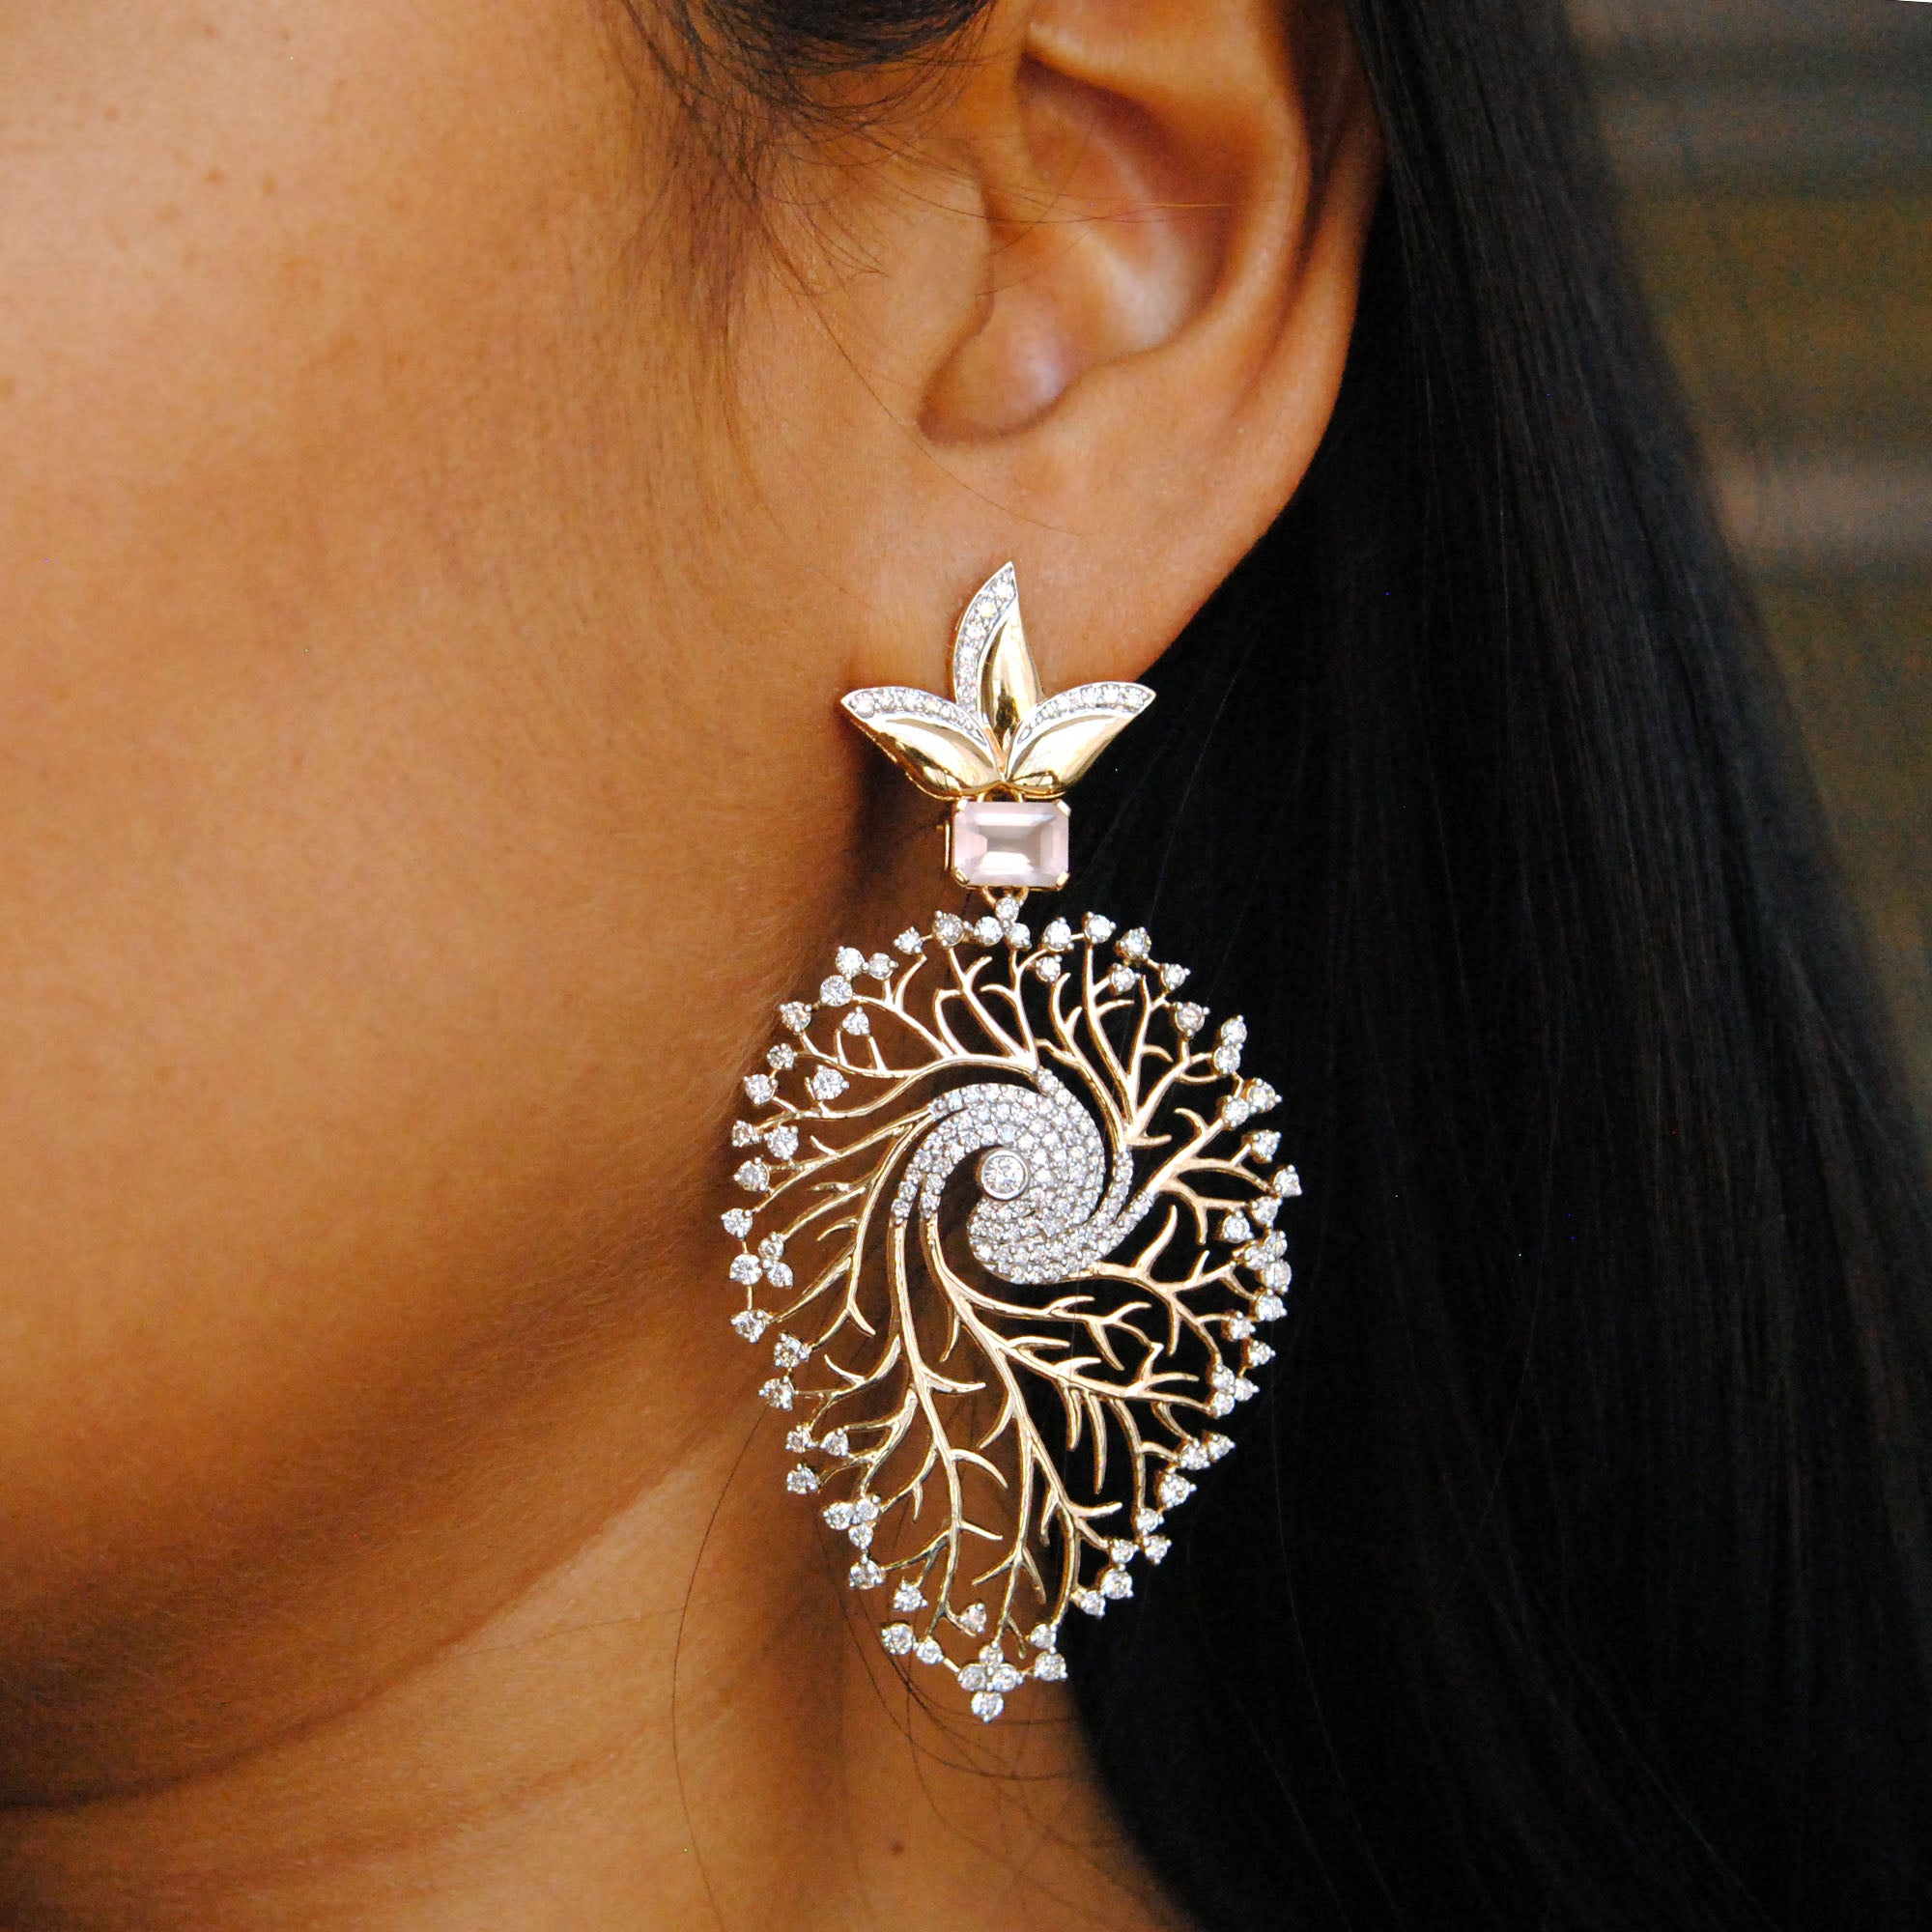 Roots of Life' Long Statement Earrings